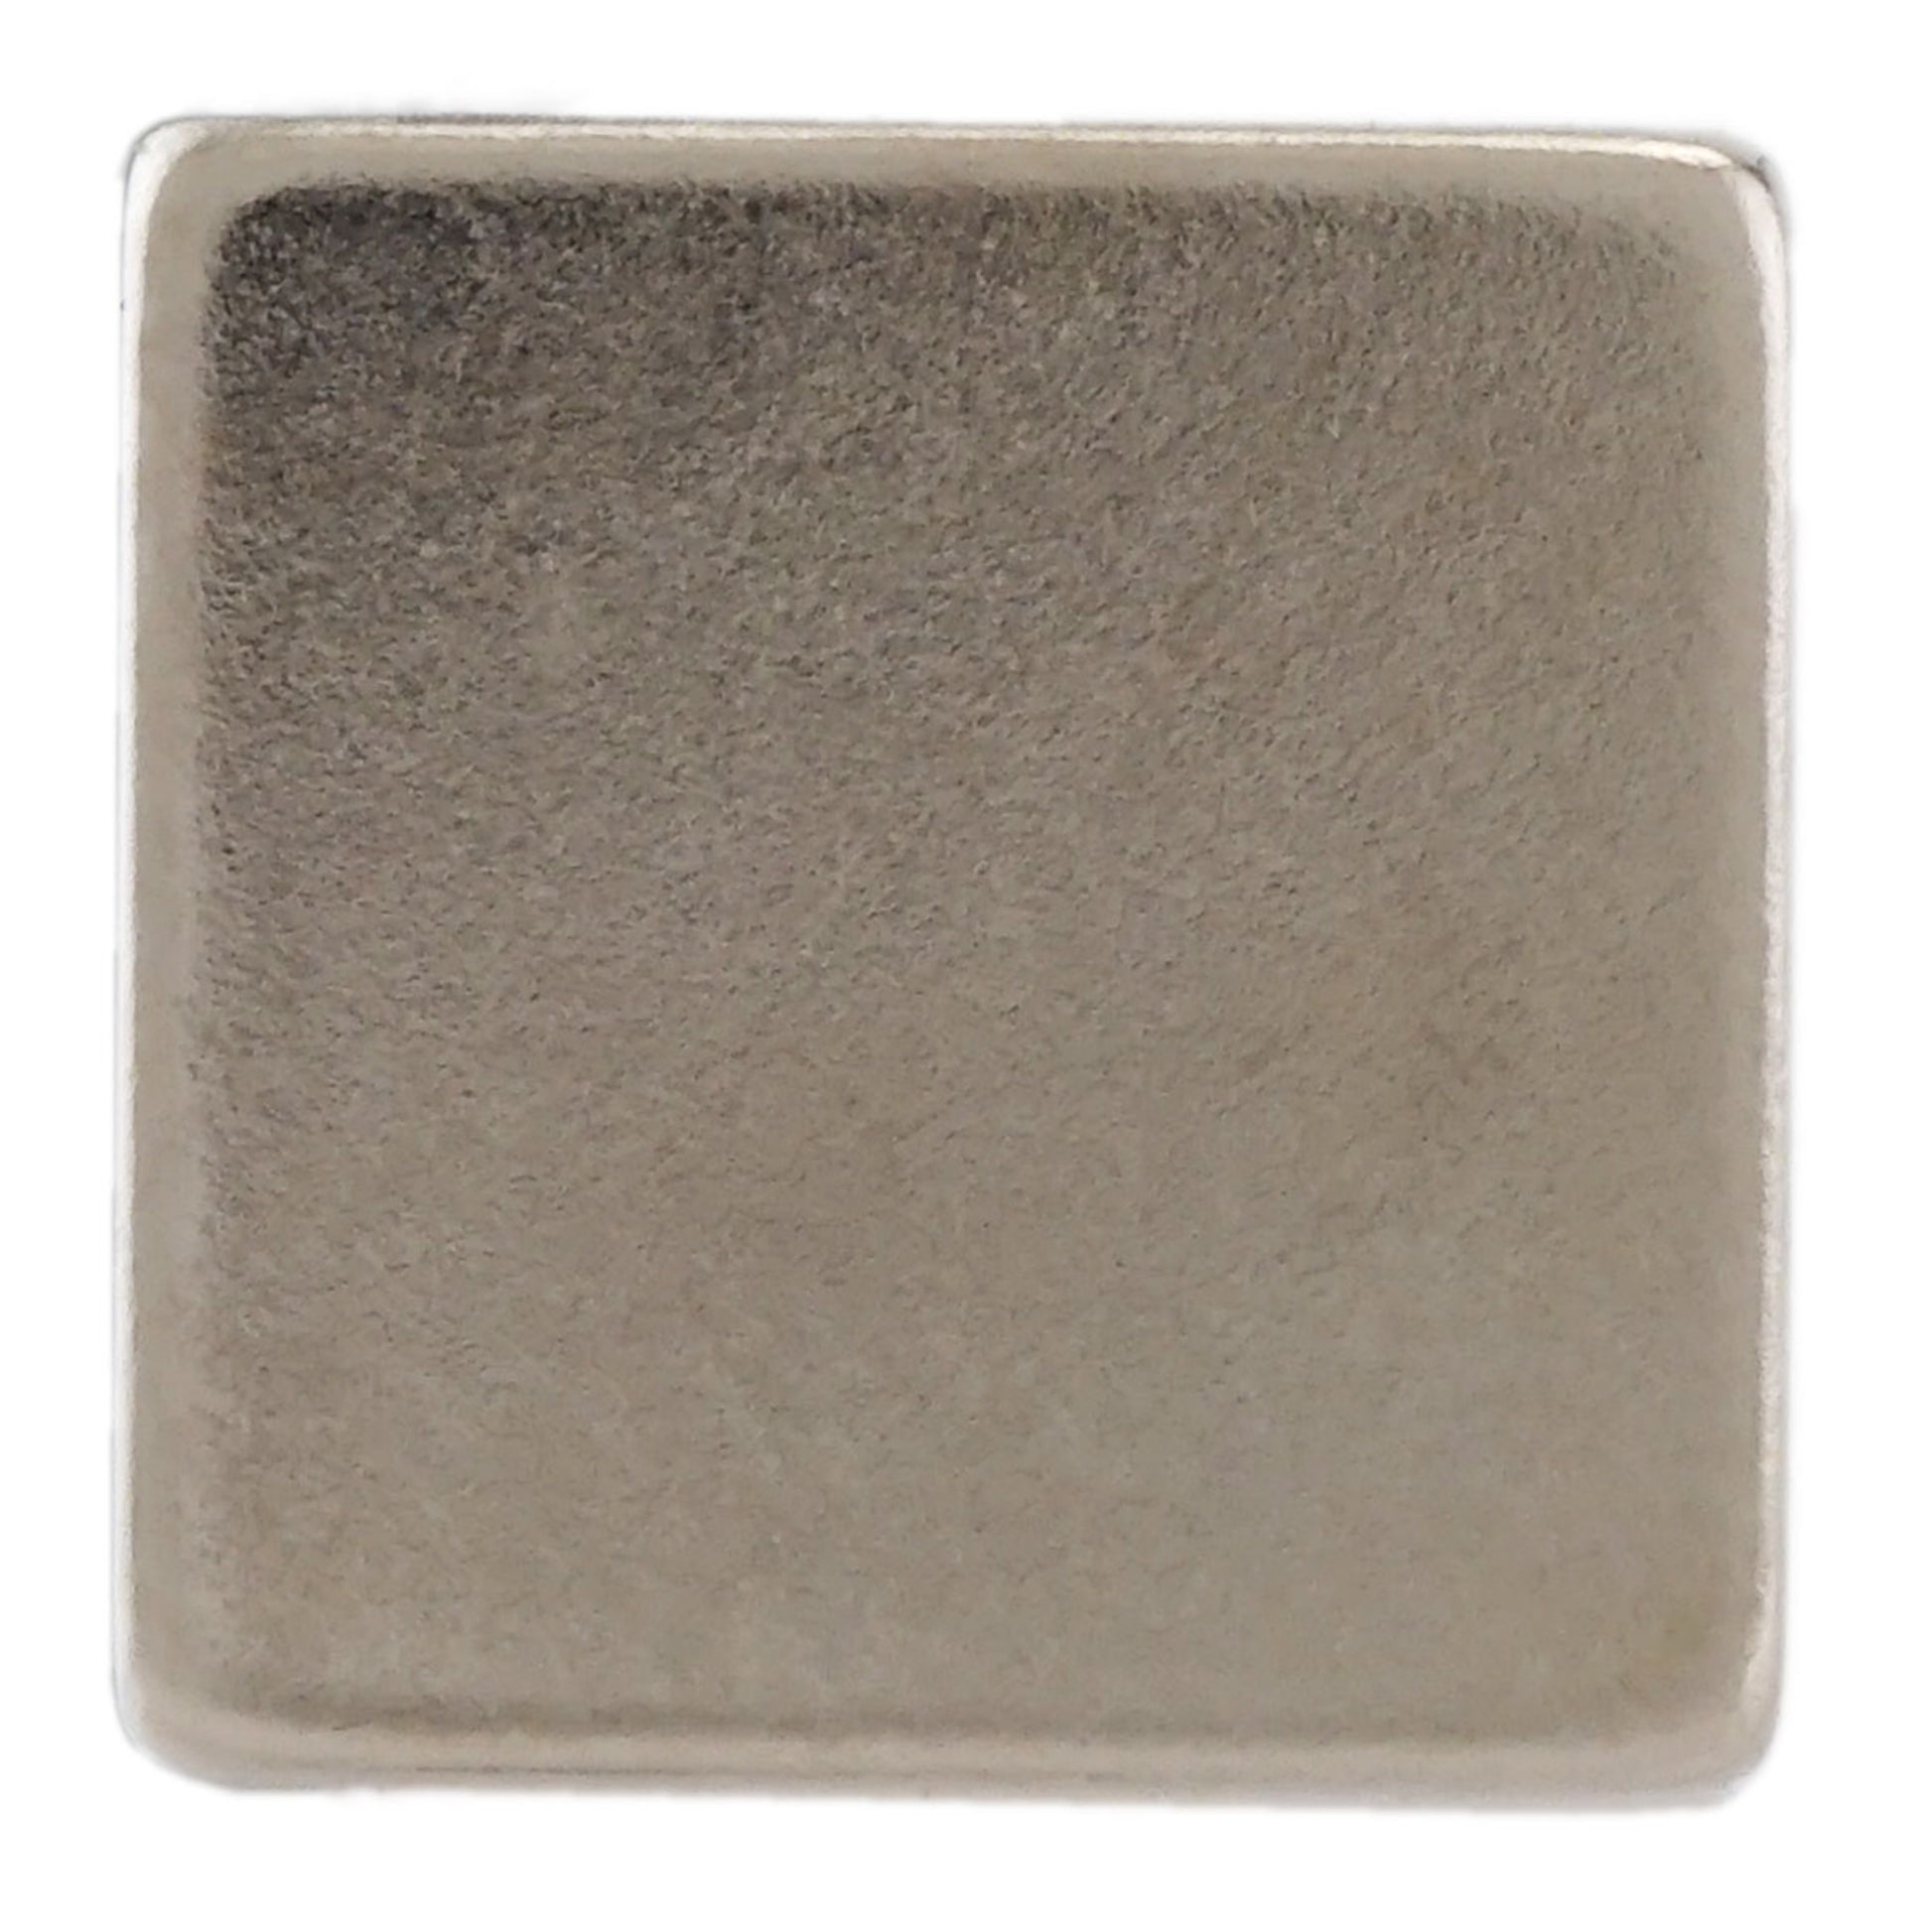 Load image into Gallery viewer, NB007502NS02 Neodymium Block Magnet with hole - Side View